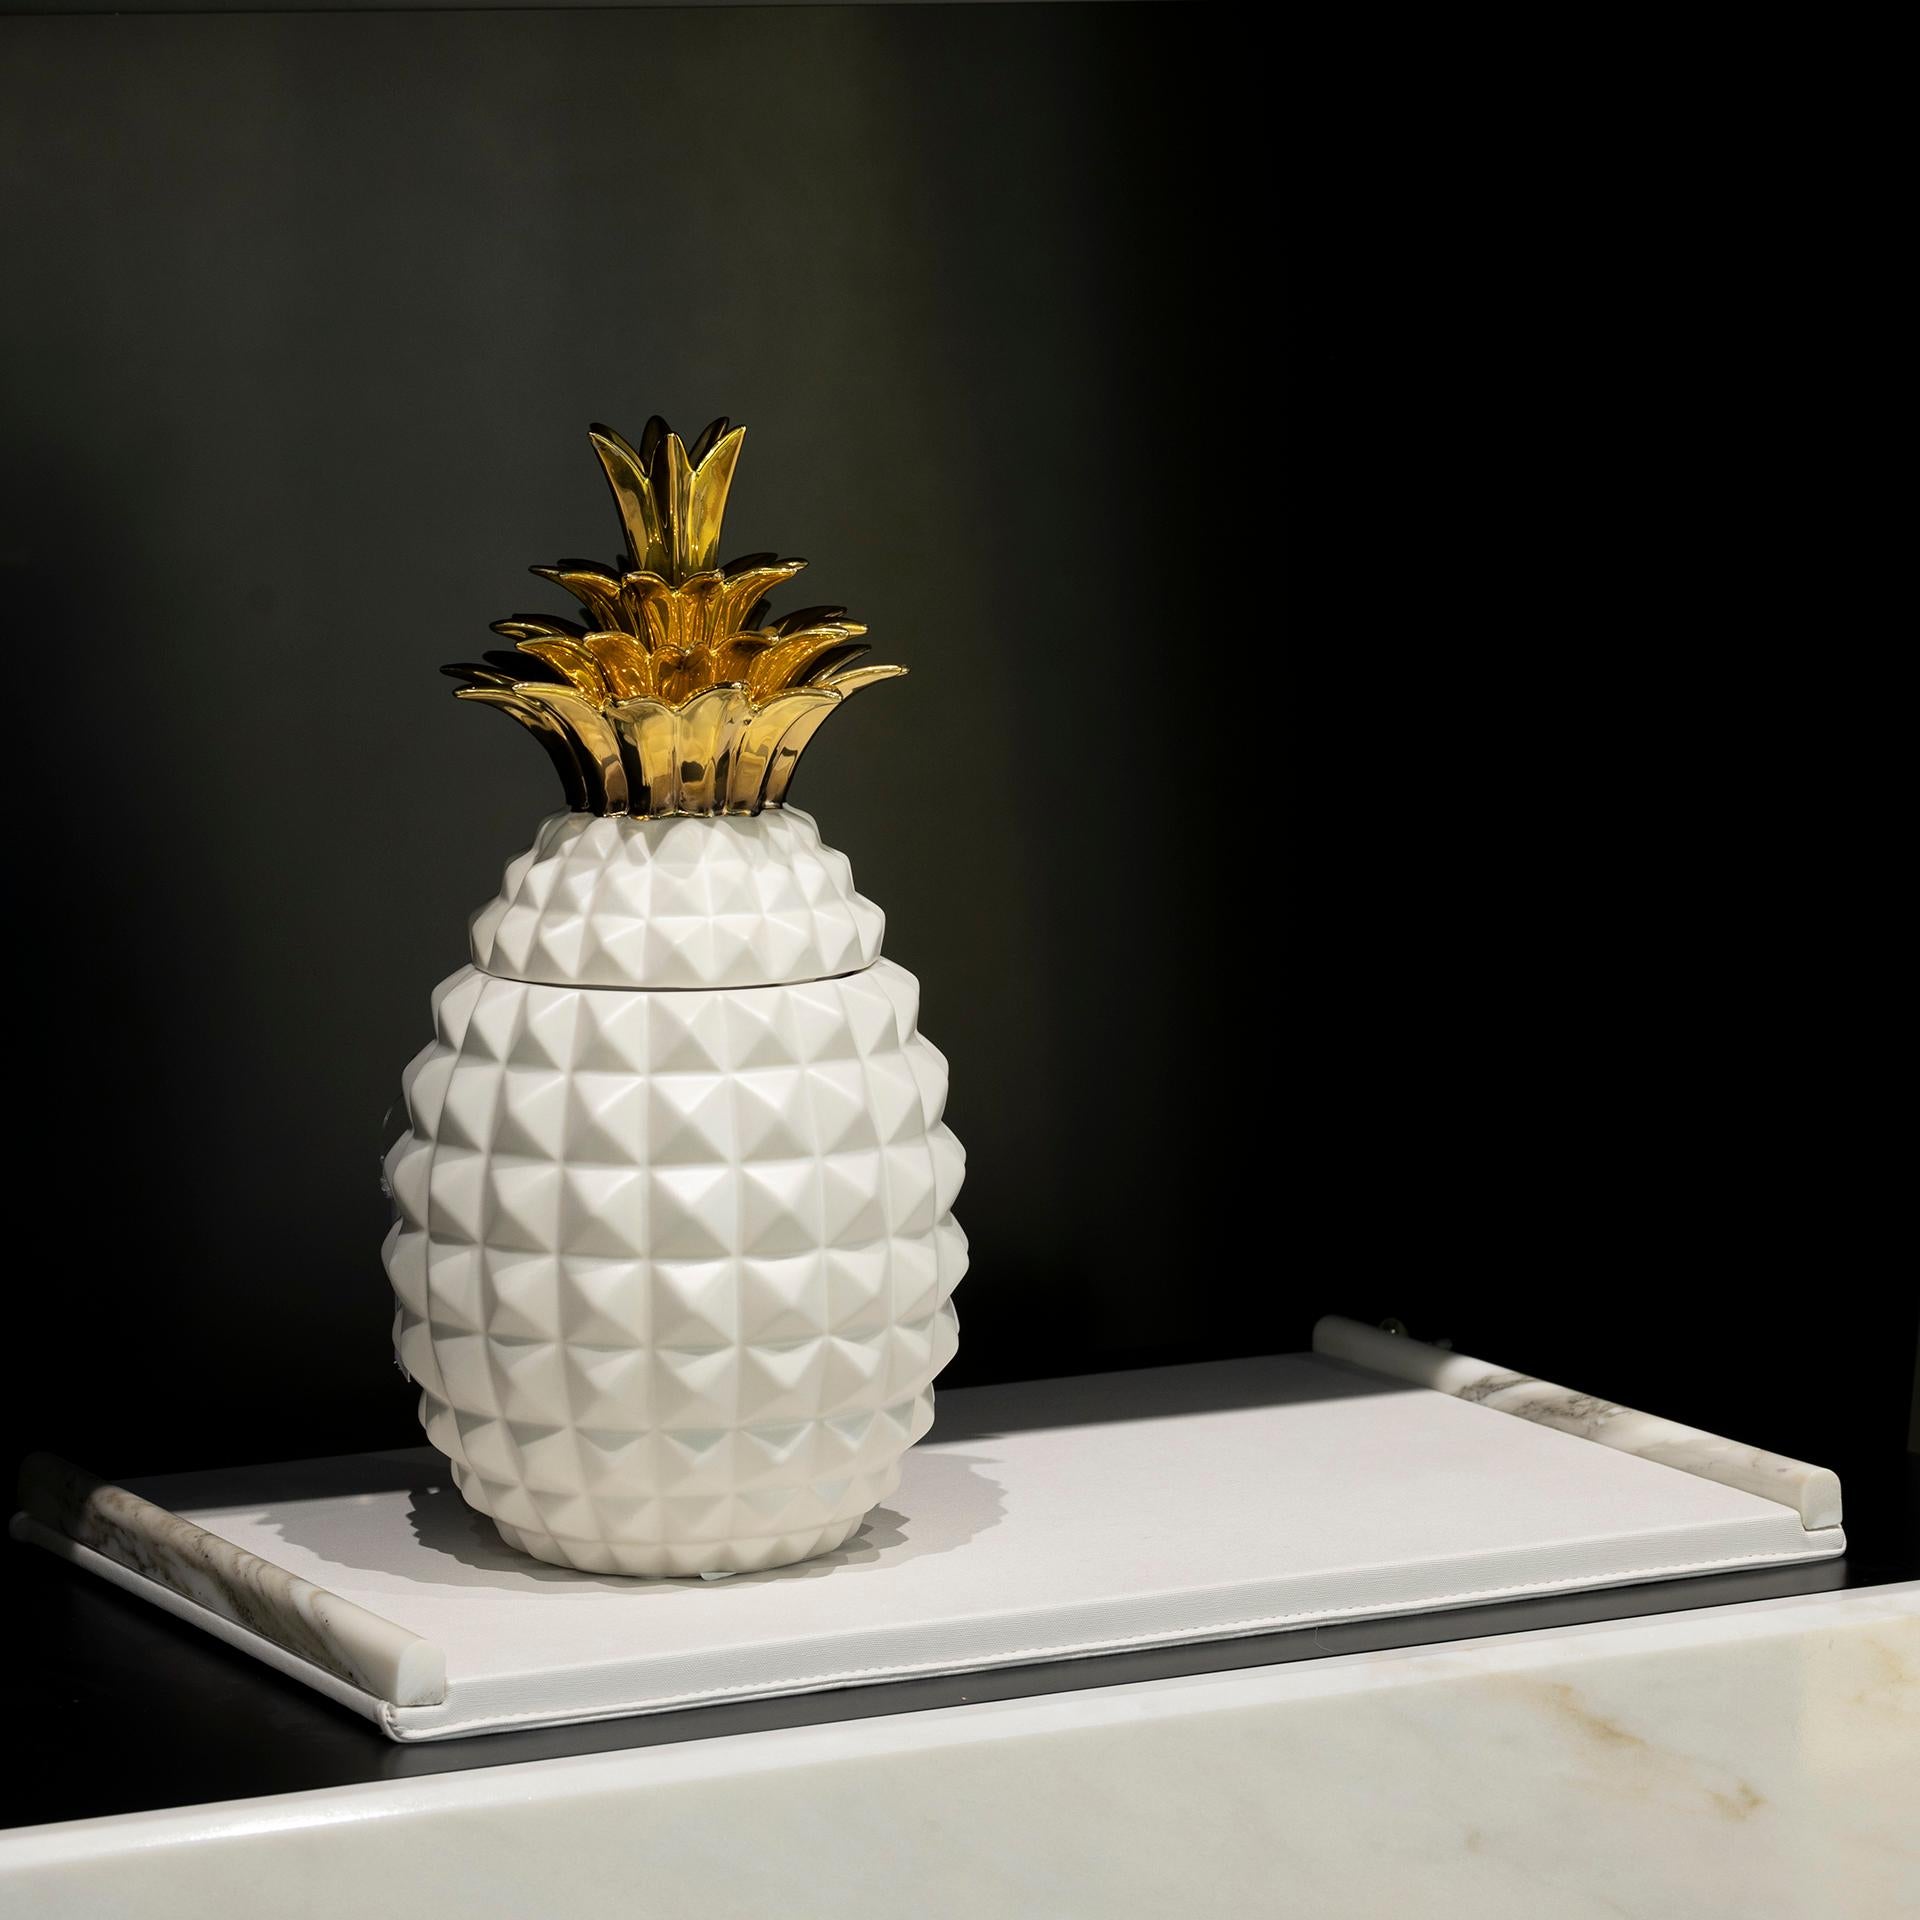 Pineapple Decorative Pots, Lusitanus Home Collection, Handcrafted in Portugal - Europe by Lusitanus Home.

This beautiful set includes two waterproof ceramic pots with lid, perfect to be displayed together and enrich your room decor.  Each piece has